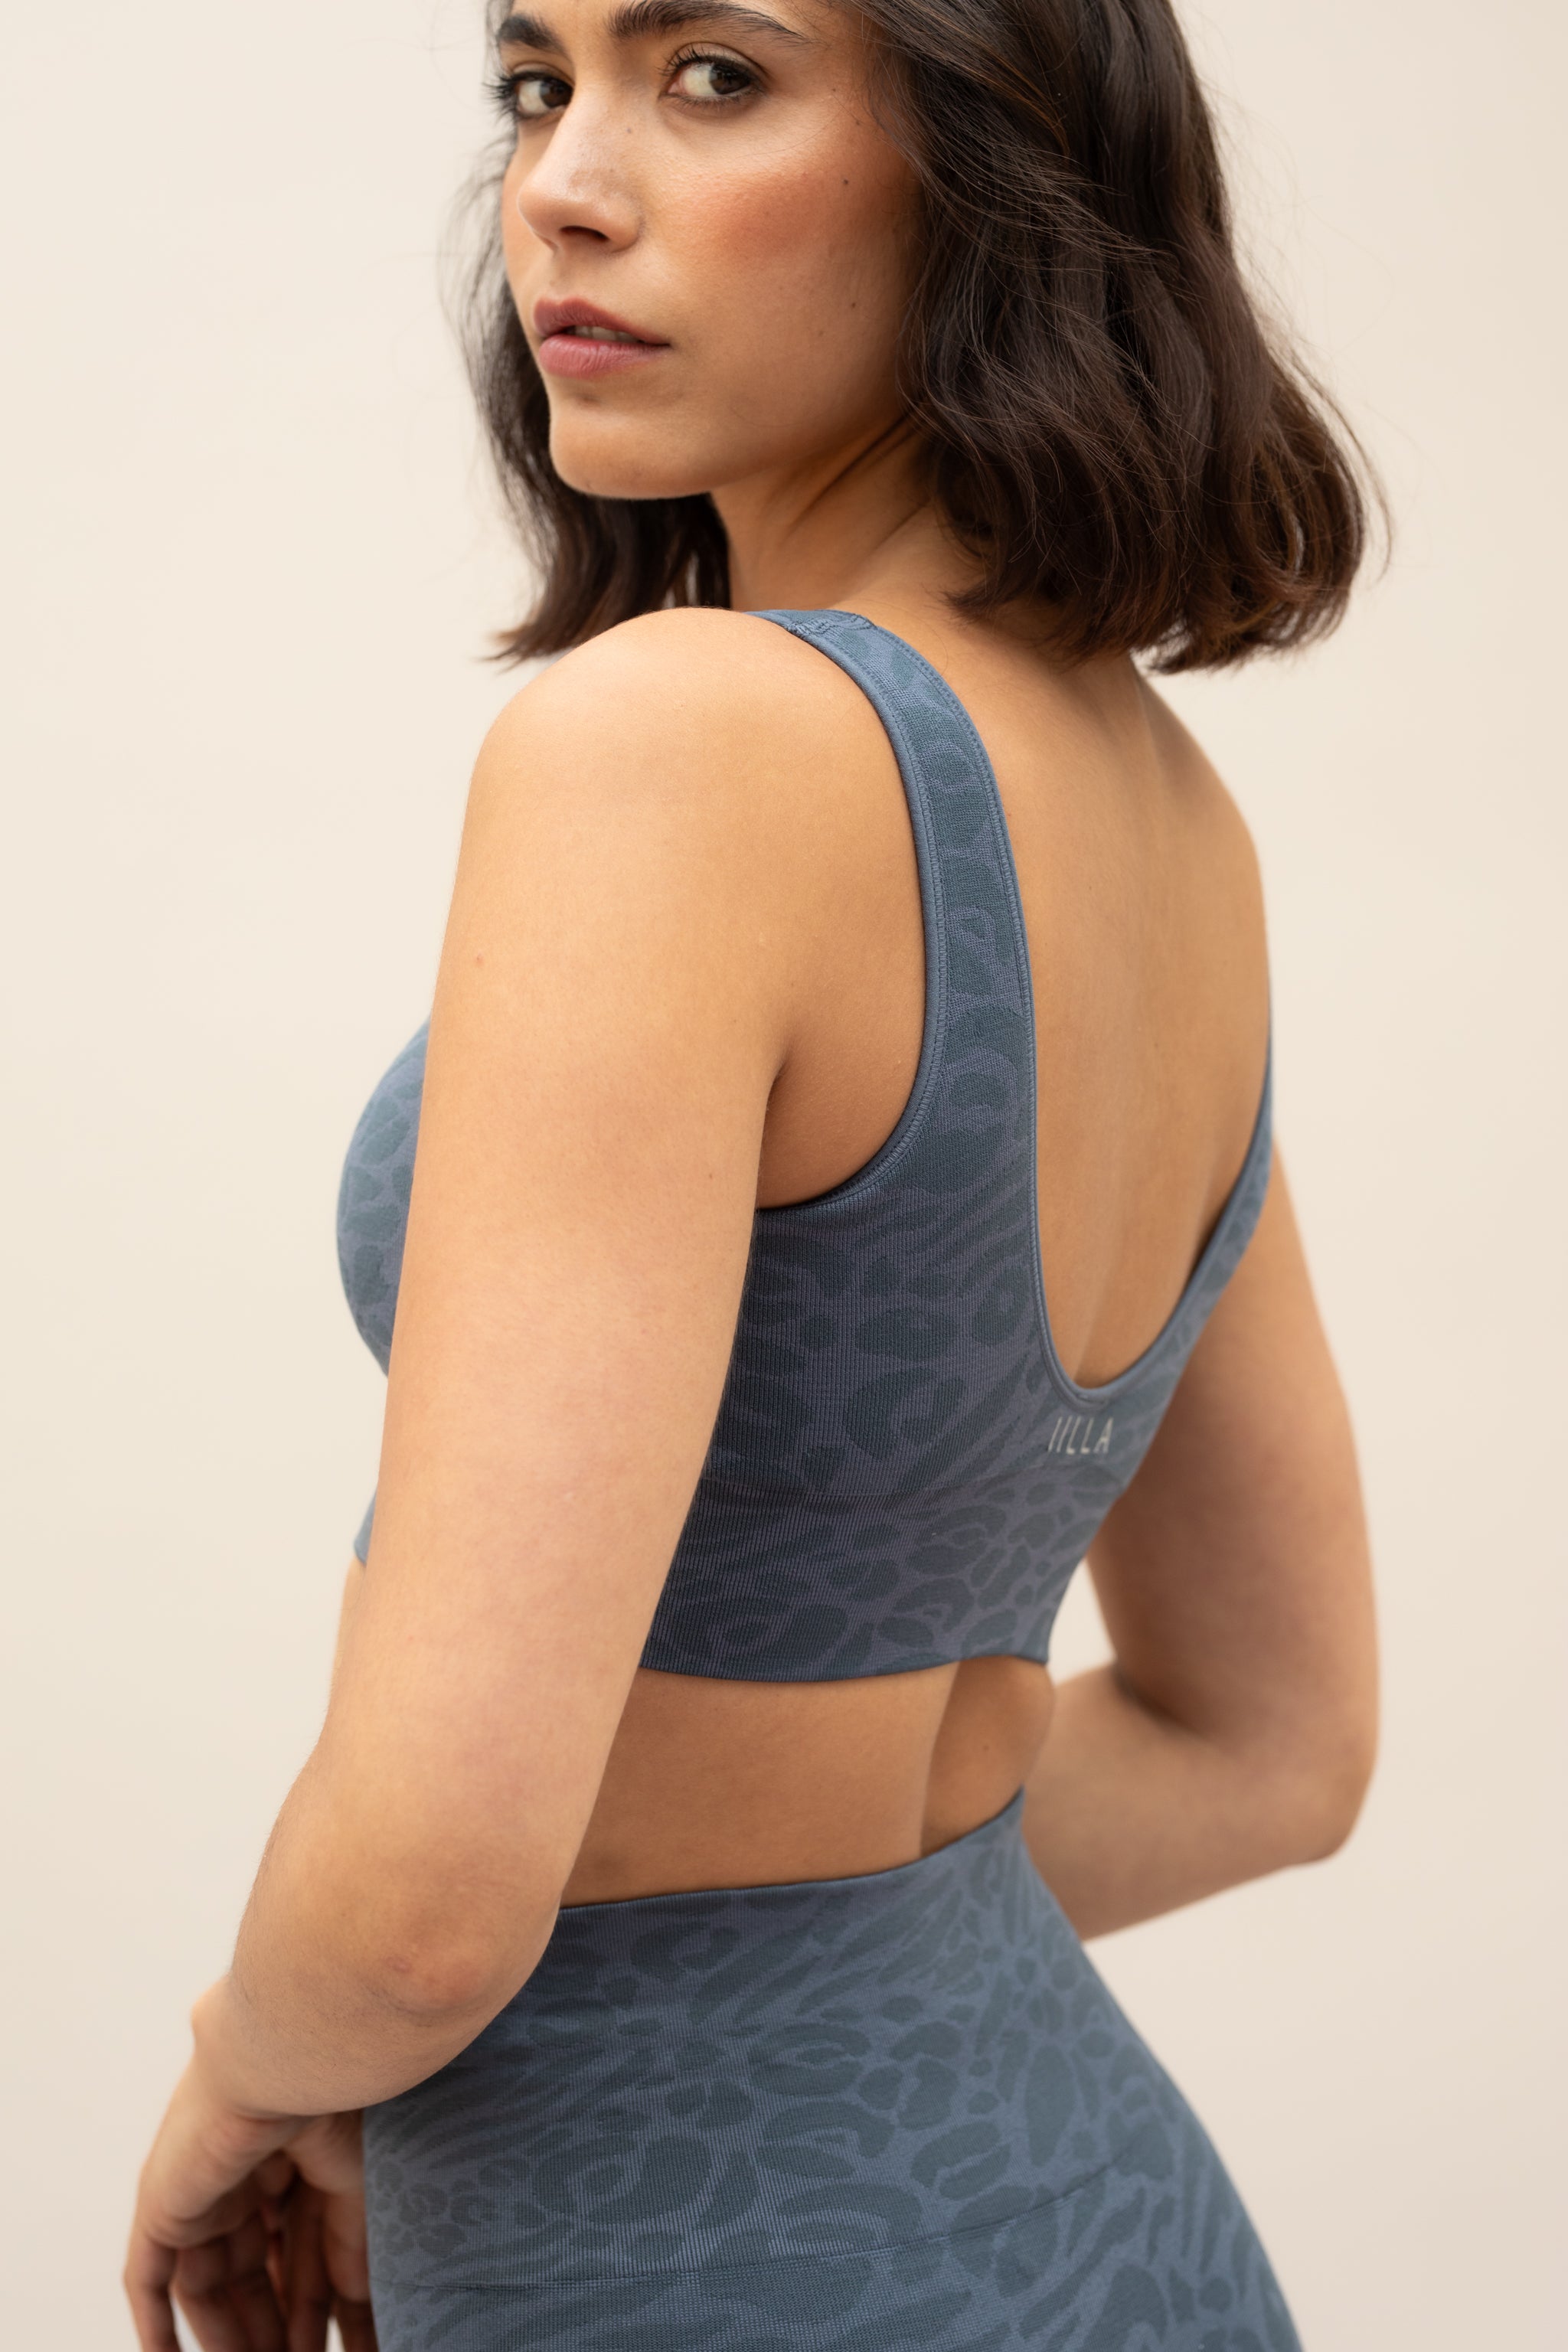 Blue leggings and blue recycled sports bra for sustainable activewear brand, Jilla.